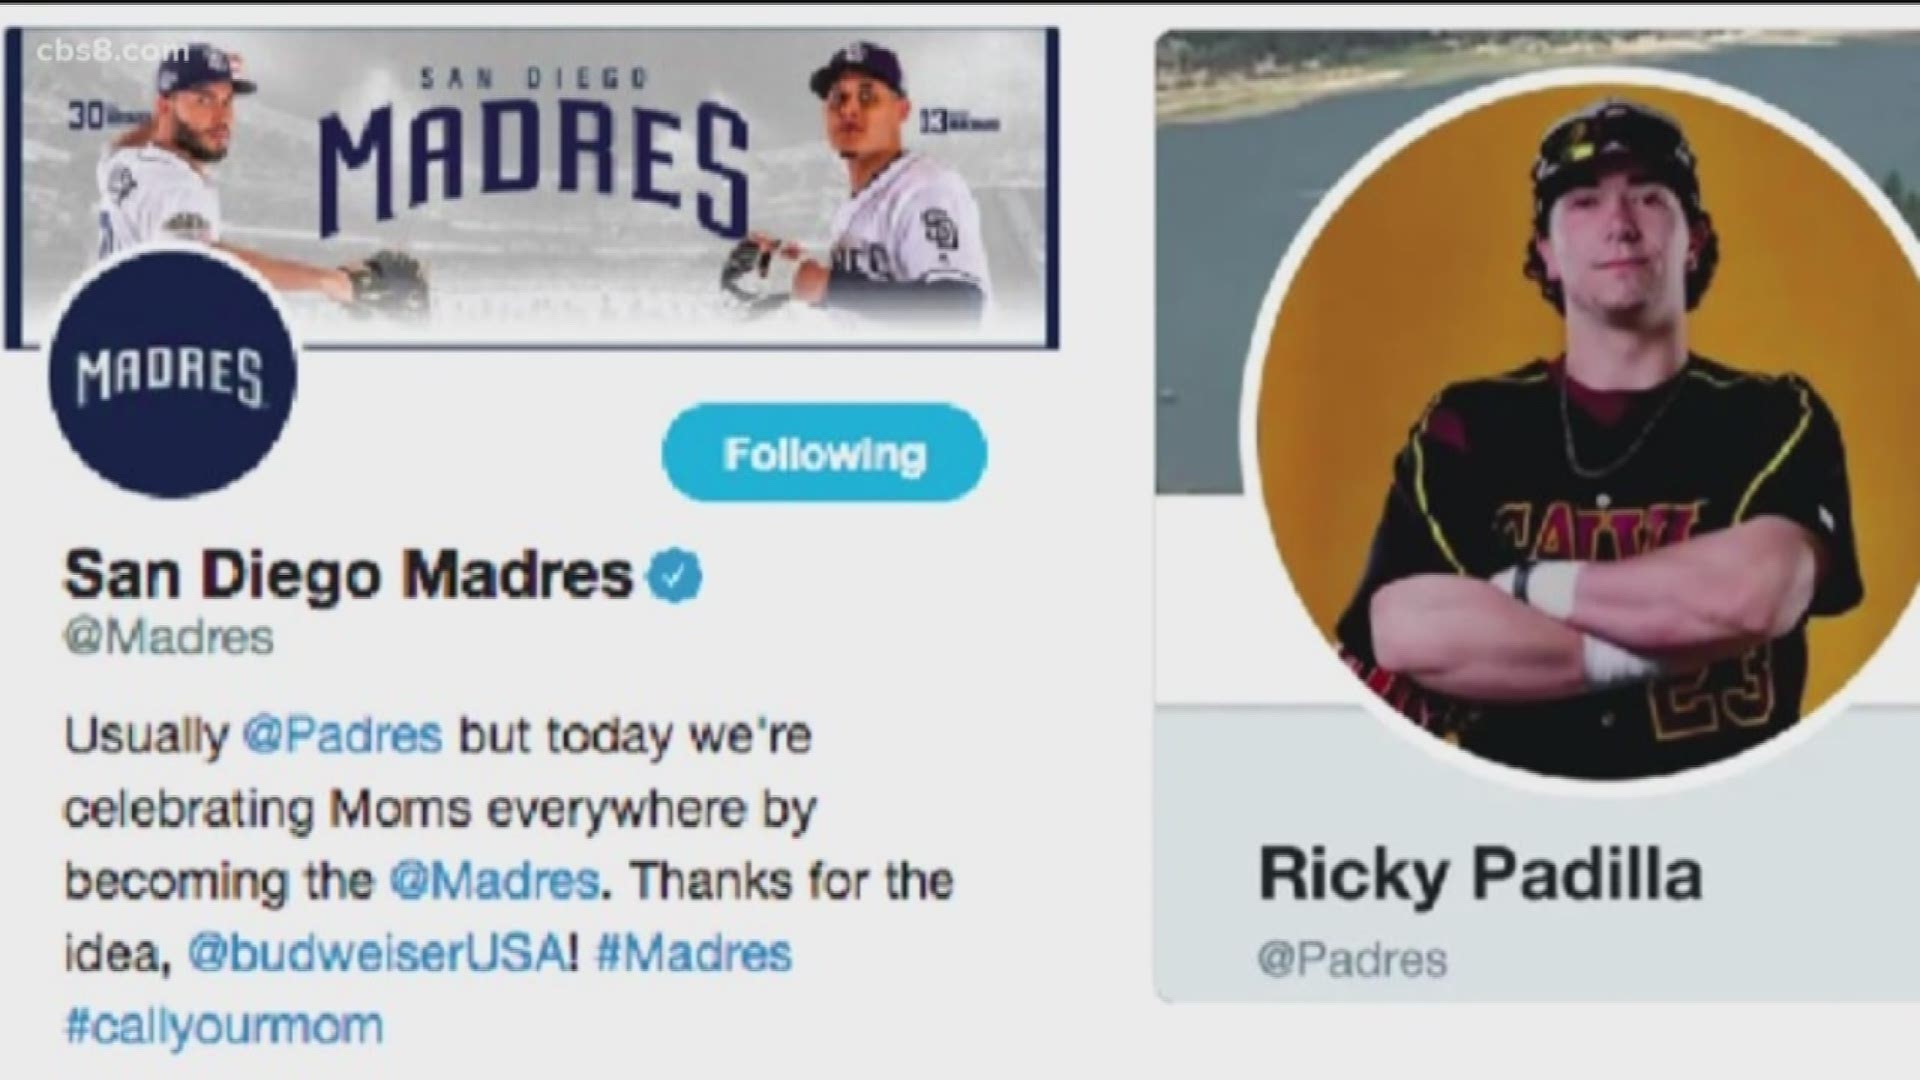 San Diego Padres temporarily lost Twitter handle after changing it to 'Madres' for Mother's Day.